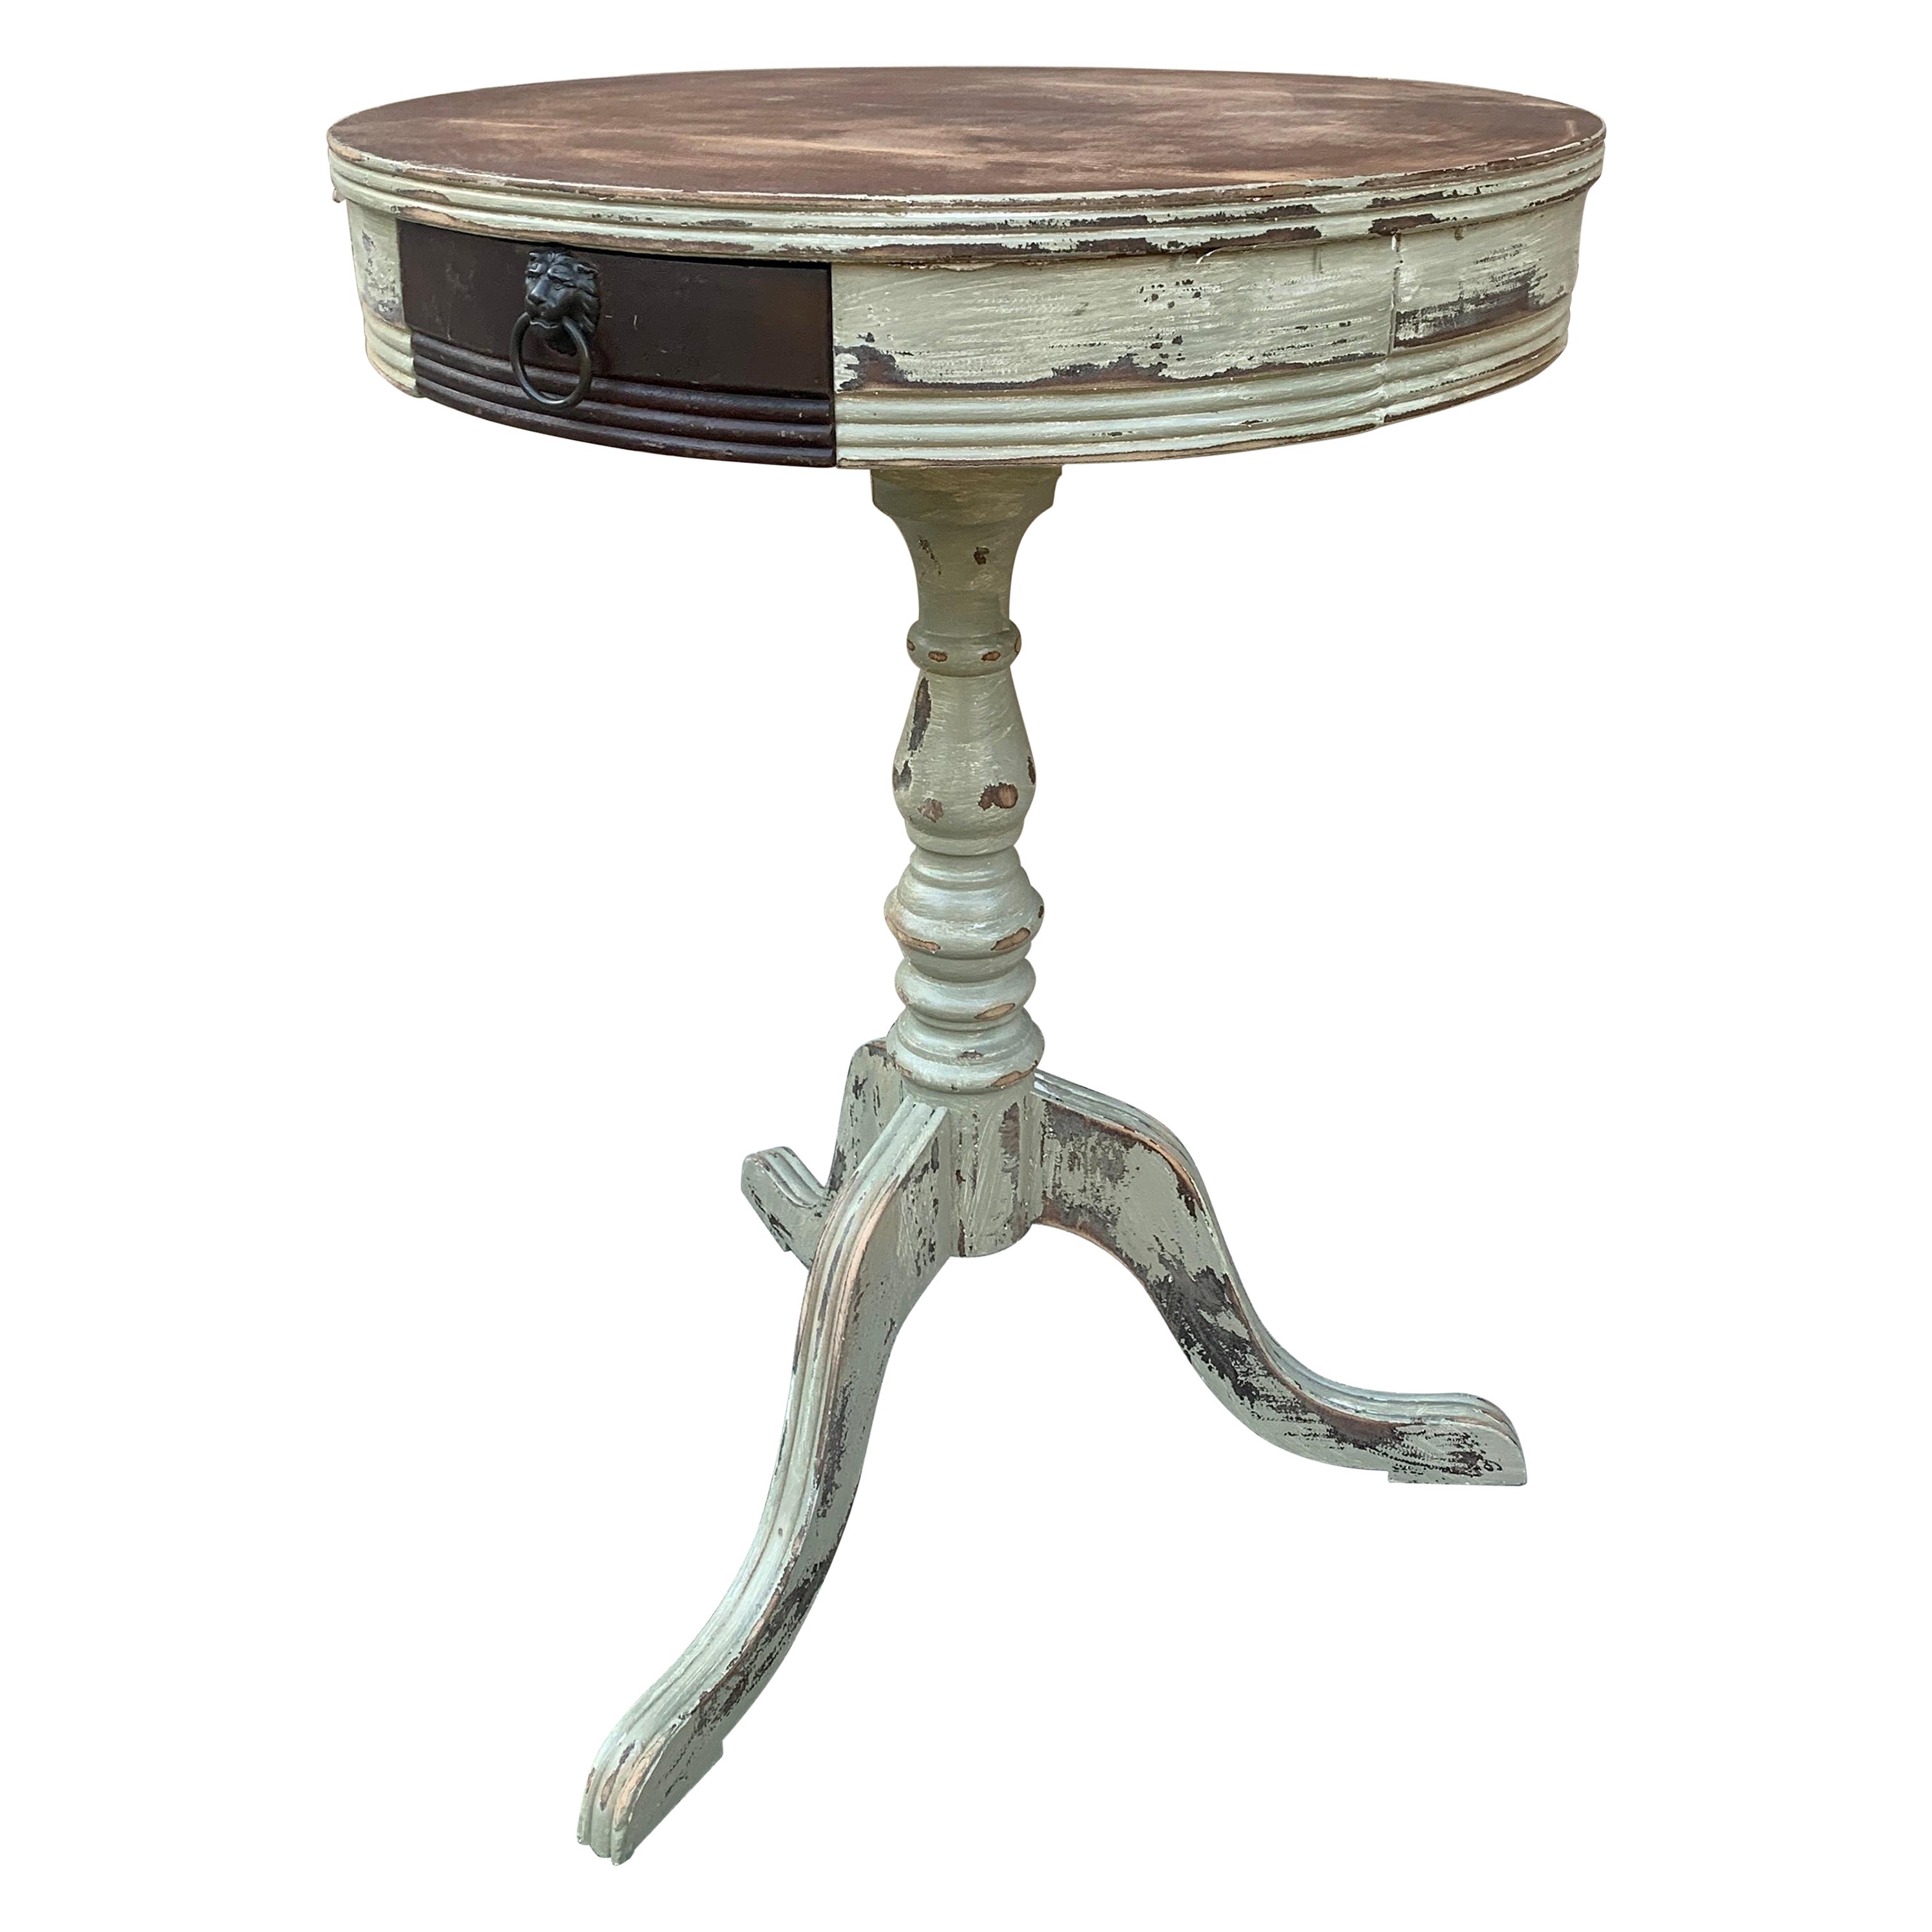 Antique American Regency Round Painted Walnut Side Table, Late 19th Century For Sale